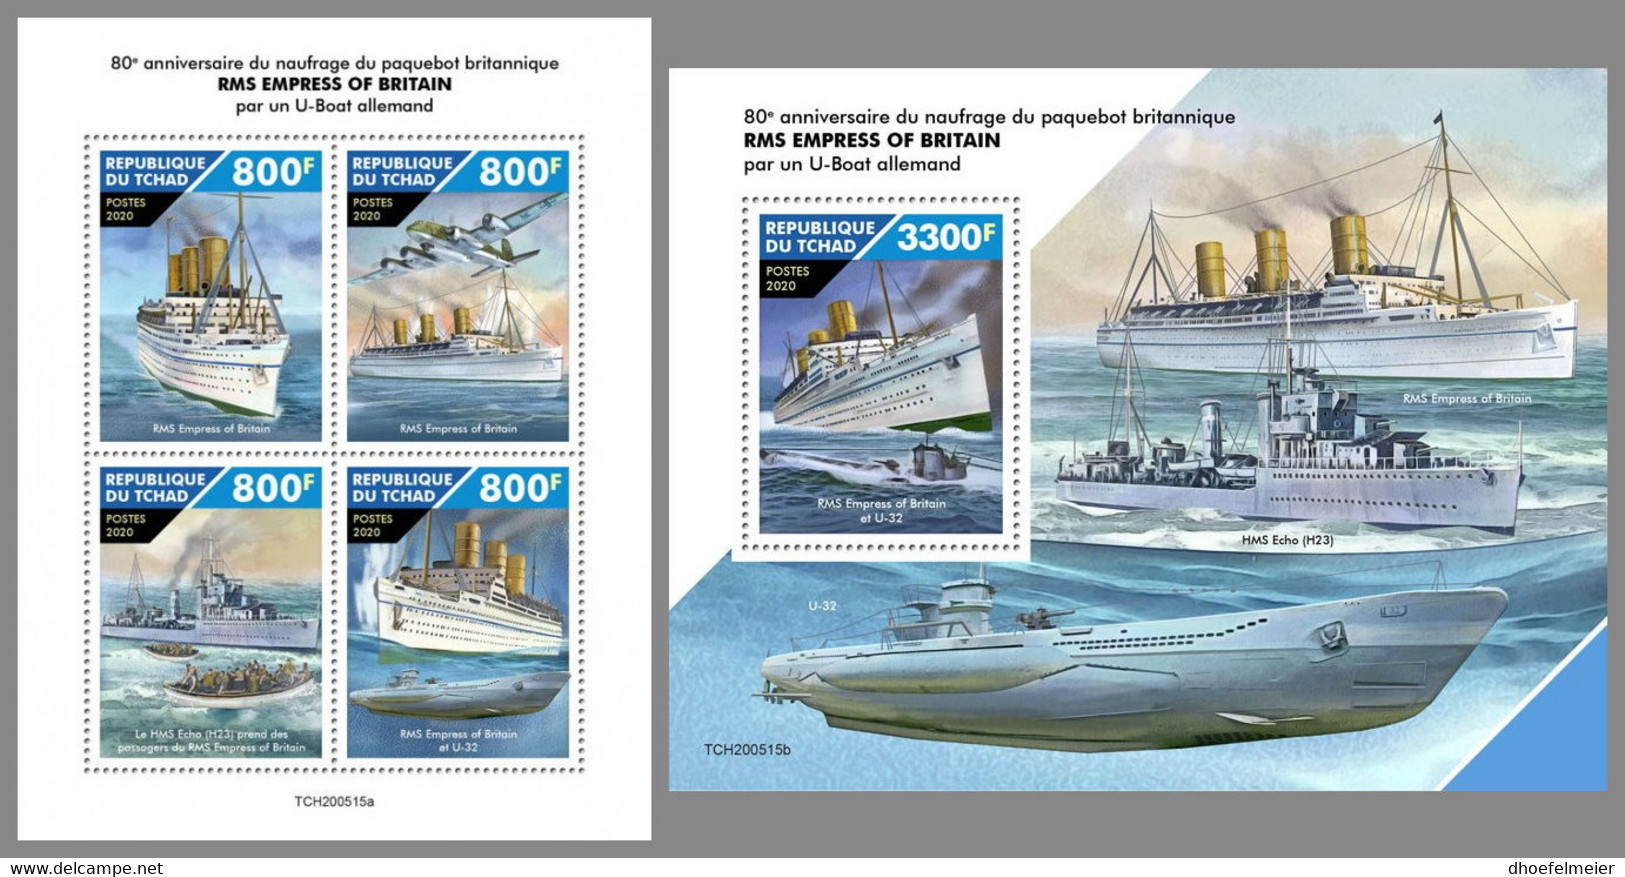 CHAD 2020 MNH Ship Schiff Navire RMS Empress Of Britain M/S+S/S - OFFICIAL ISSUE - DHQ2107 - Boten